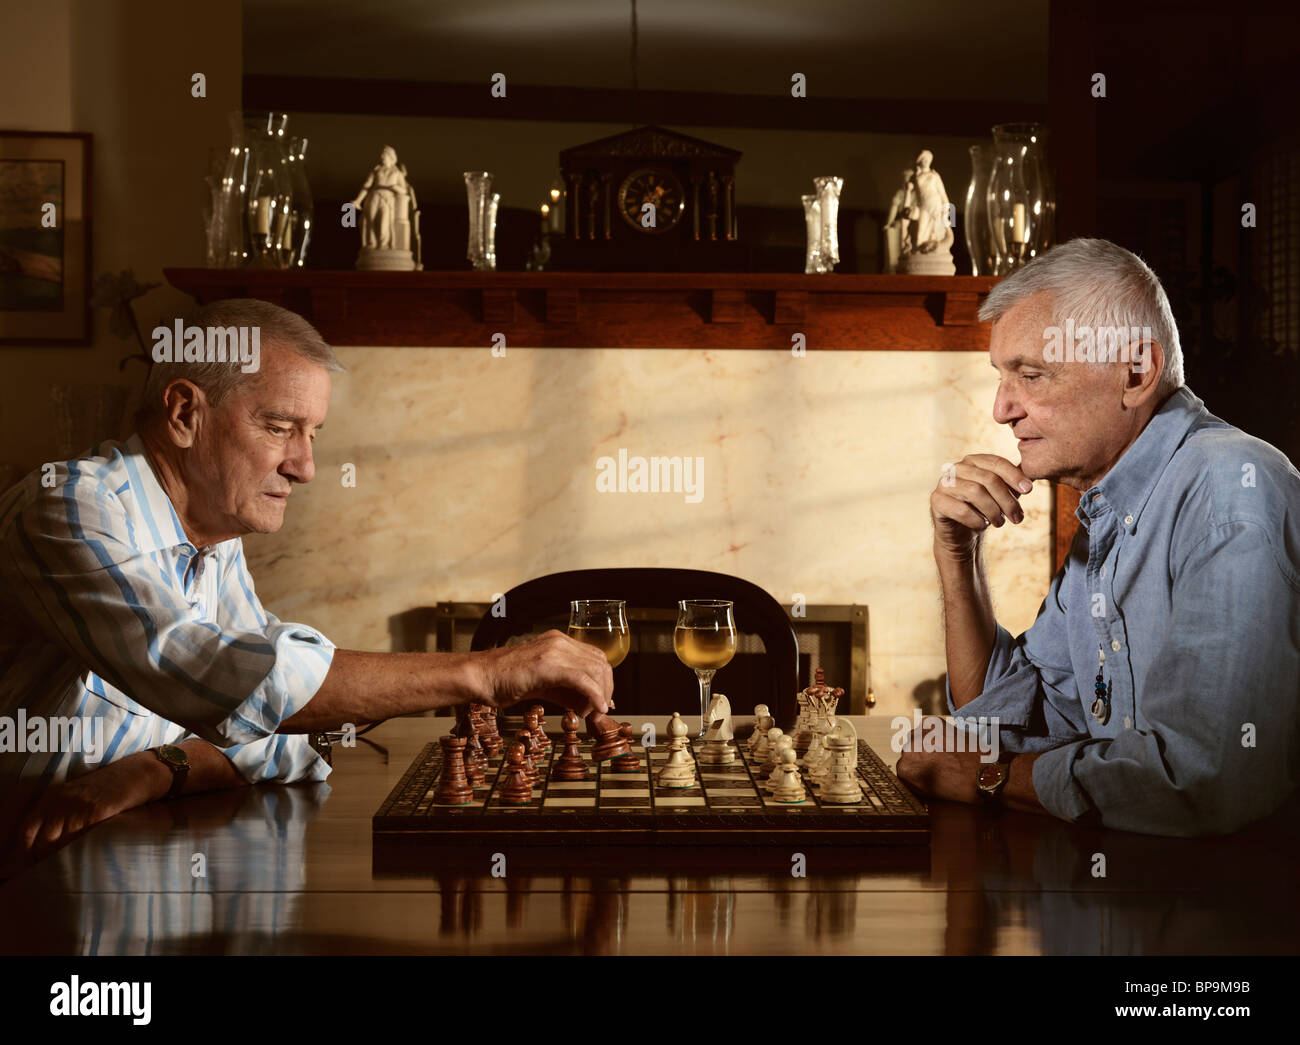 Two seniors enjoying a game of chess in the evening Stock Photo